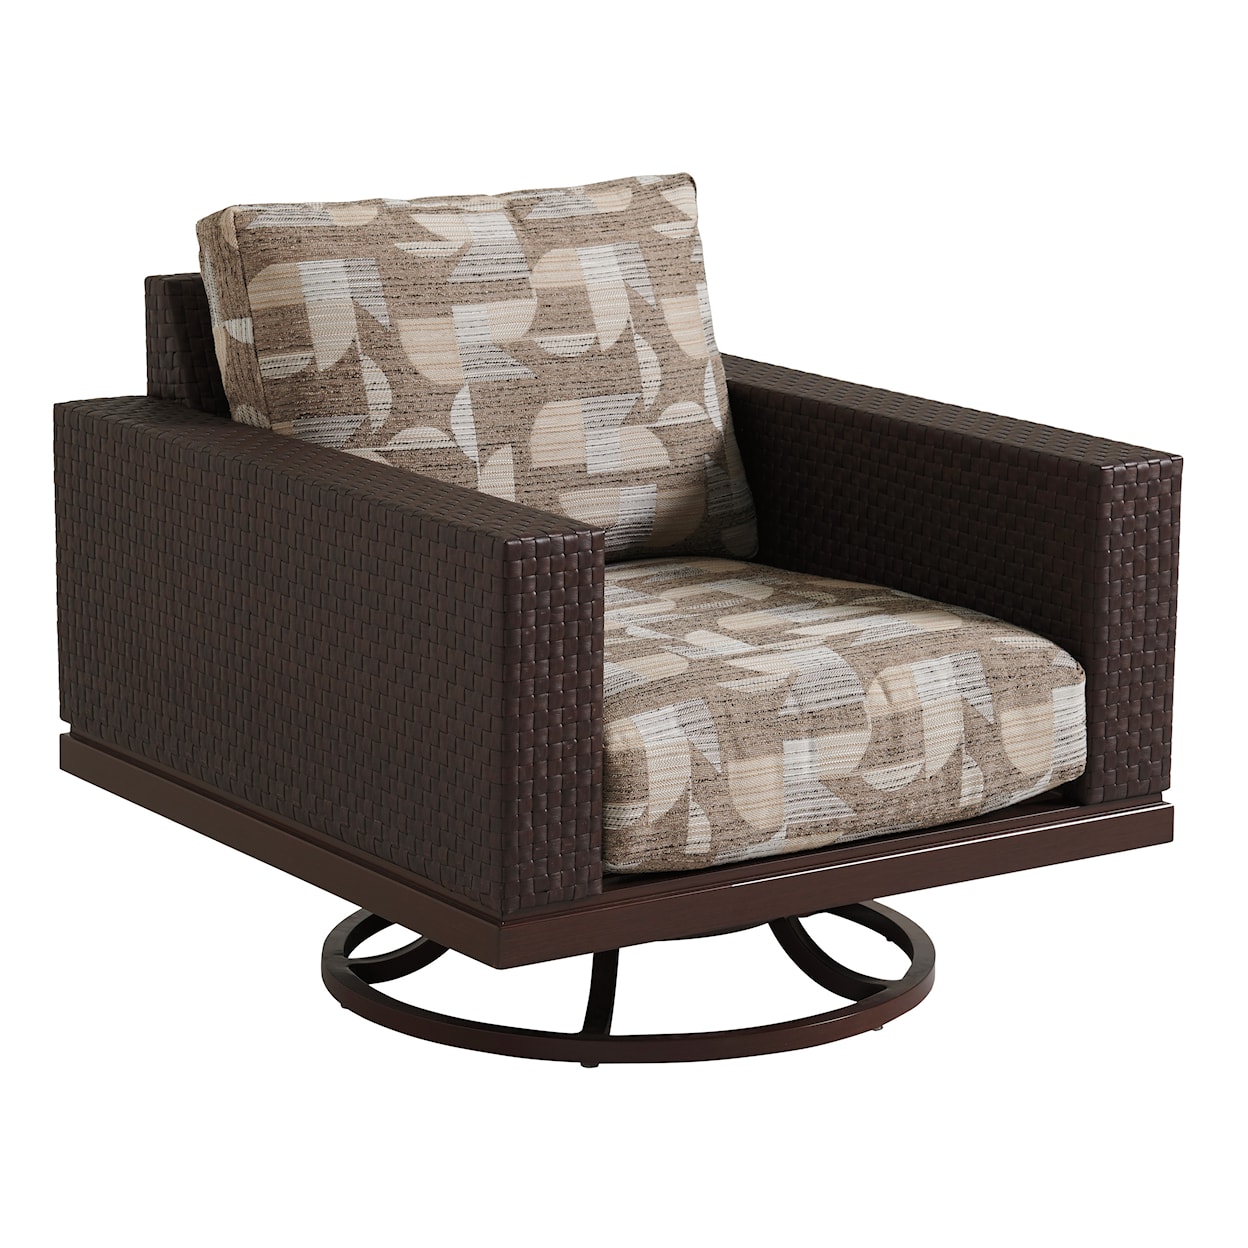 Tommy Bahama Outdoor Living Abaco Swivel Lounge Chair